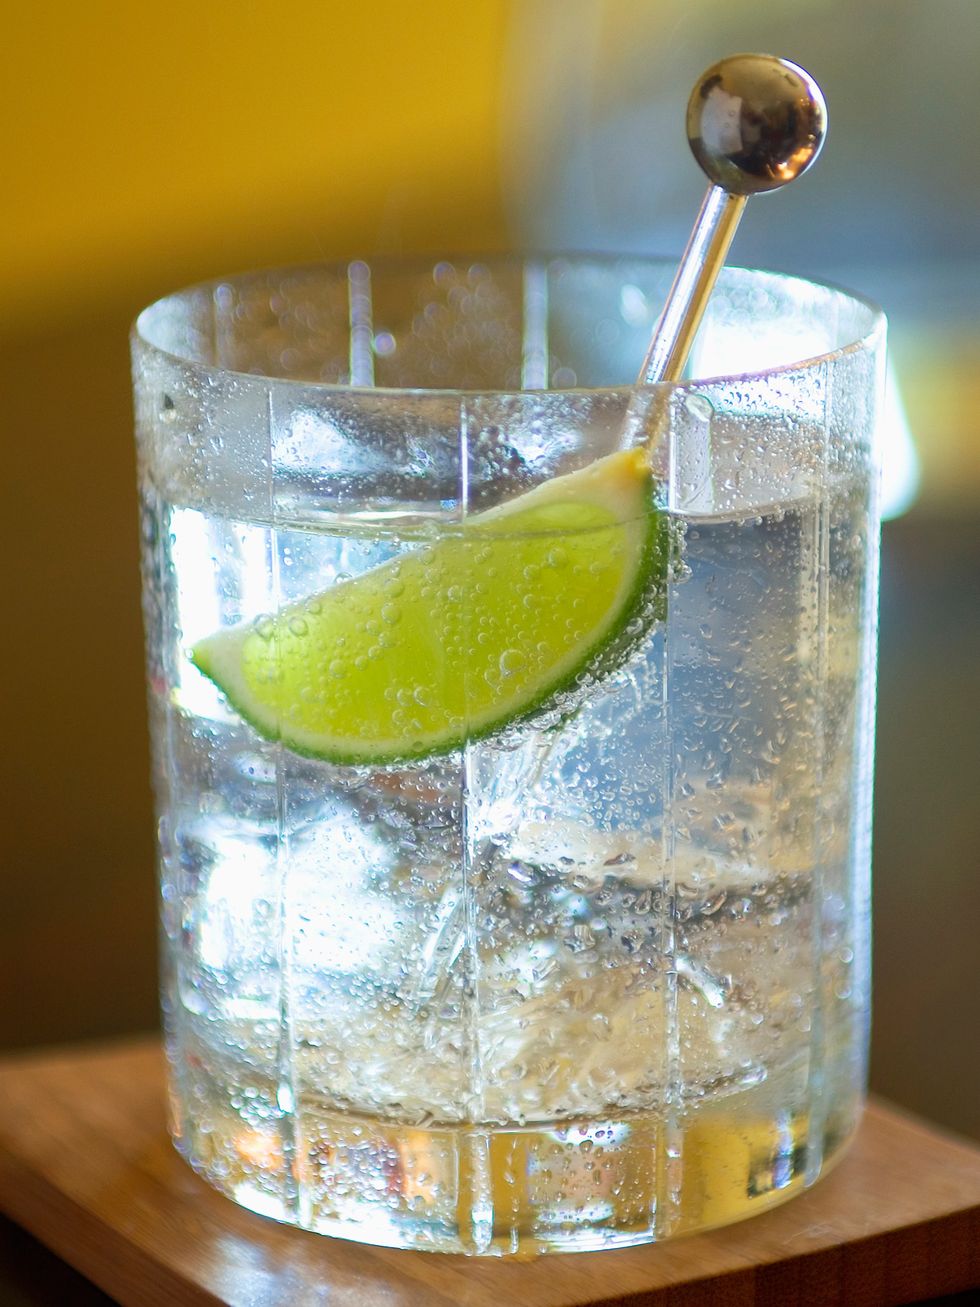 Drink, Gin and tonic, Non-alcoholic beverage, Lemon-lime, Distilled beverage, Classic cocktail, Alcoholic beverage, Lemonsoda, Vodka and tonic, Cocktail garnish, 